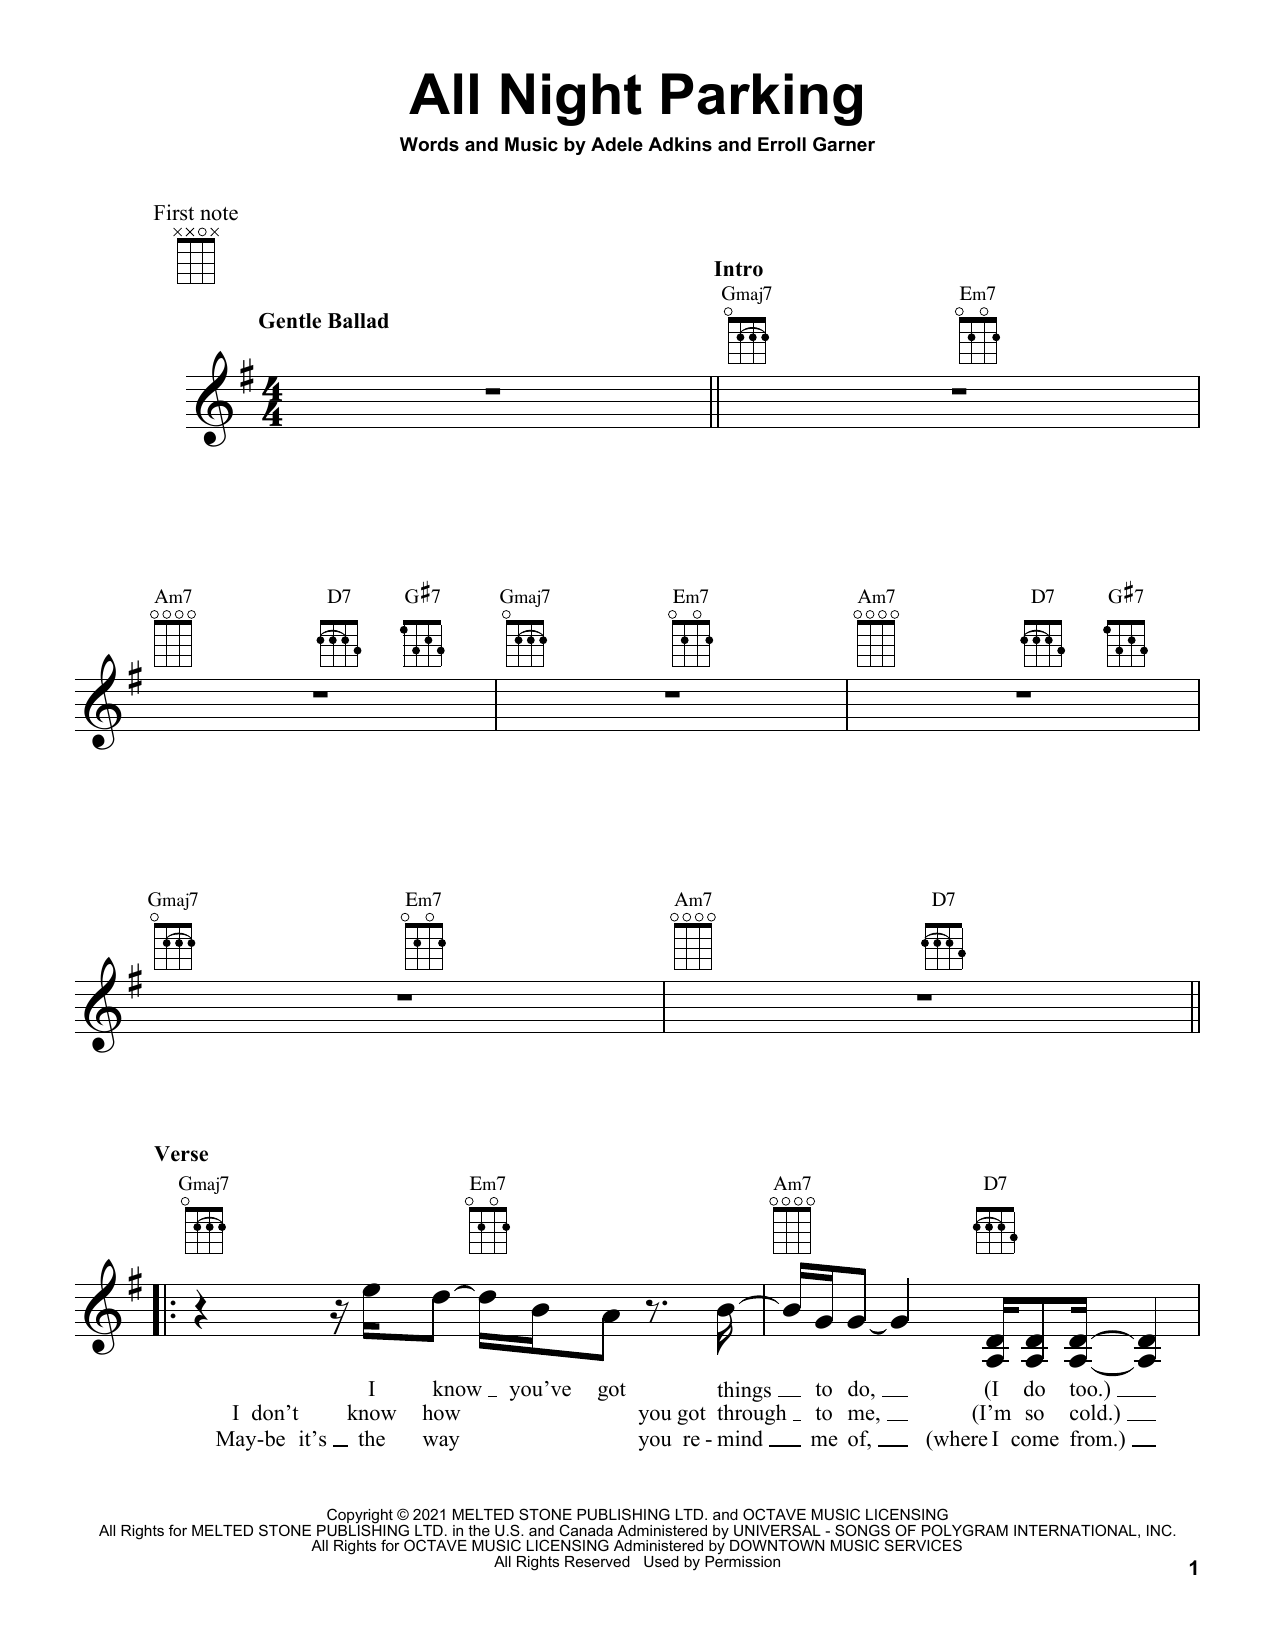 Download Adele All Night Parking (Interlude) Sheet Music